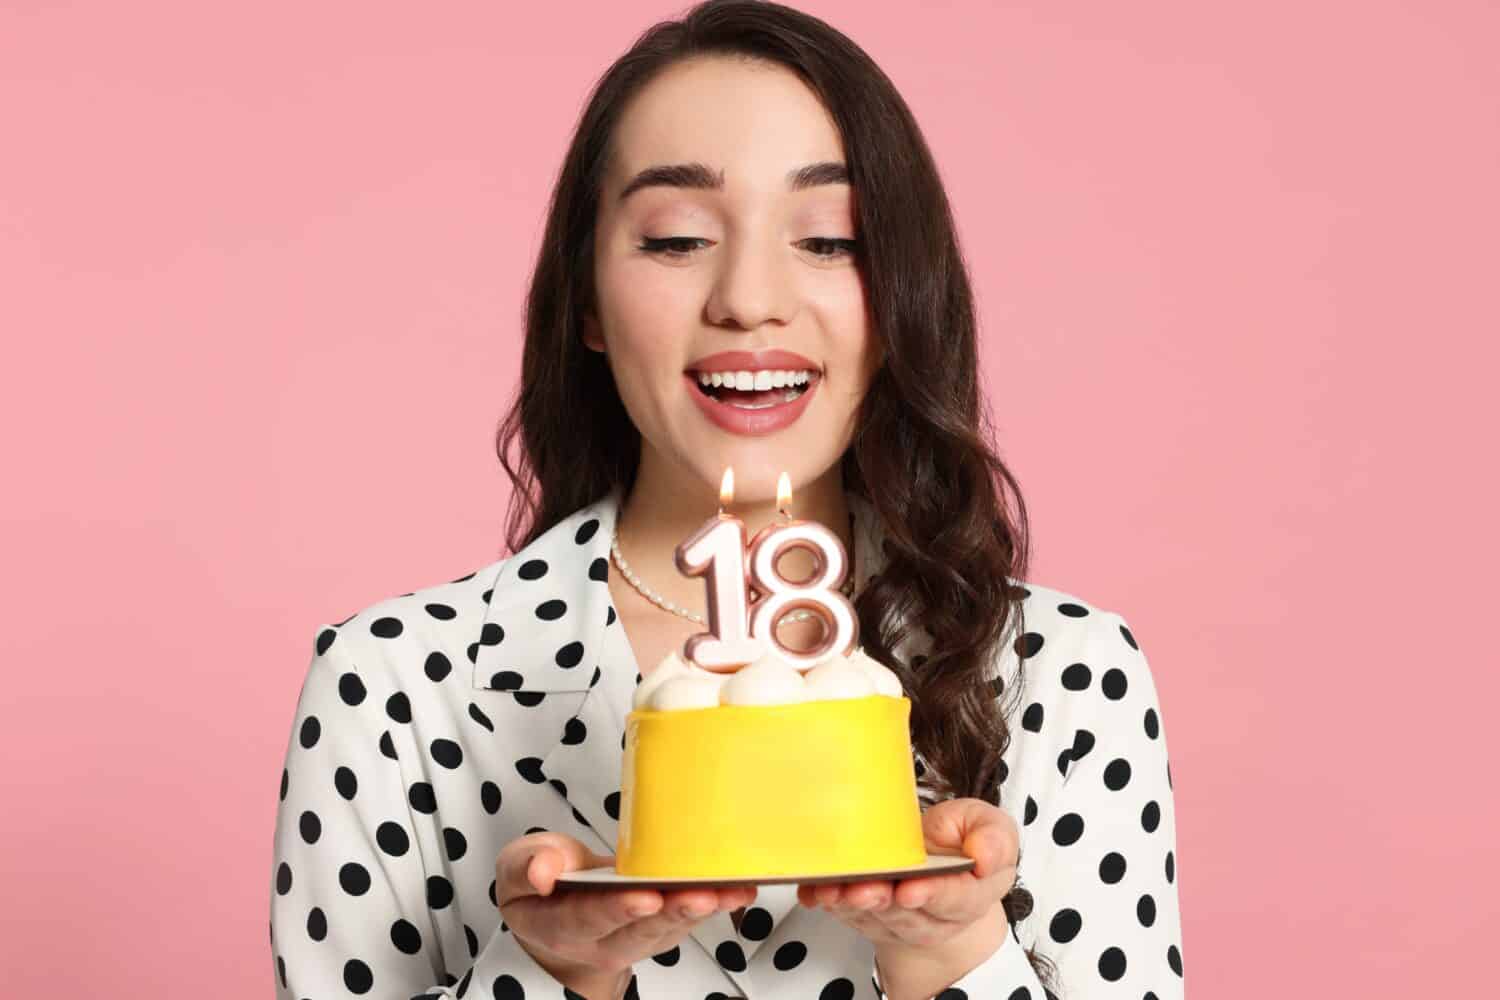 Coming of age party - 18th birthday. Smiling woman holding delicious cake with number shaped candles on pink background